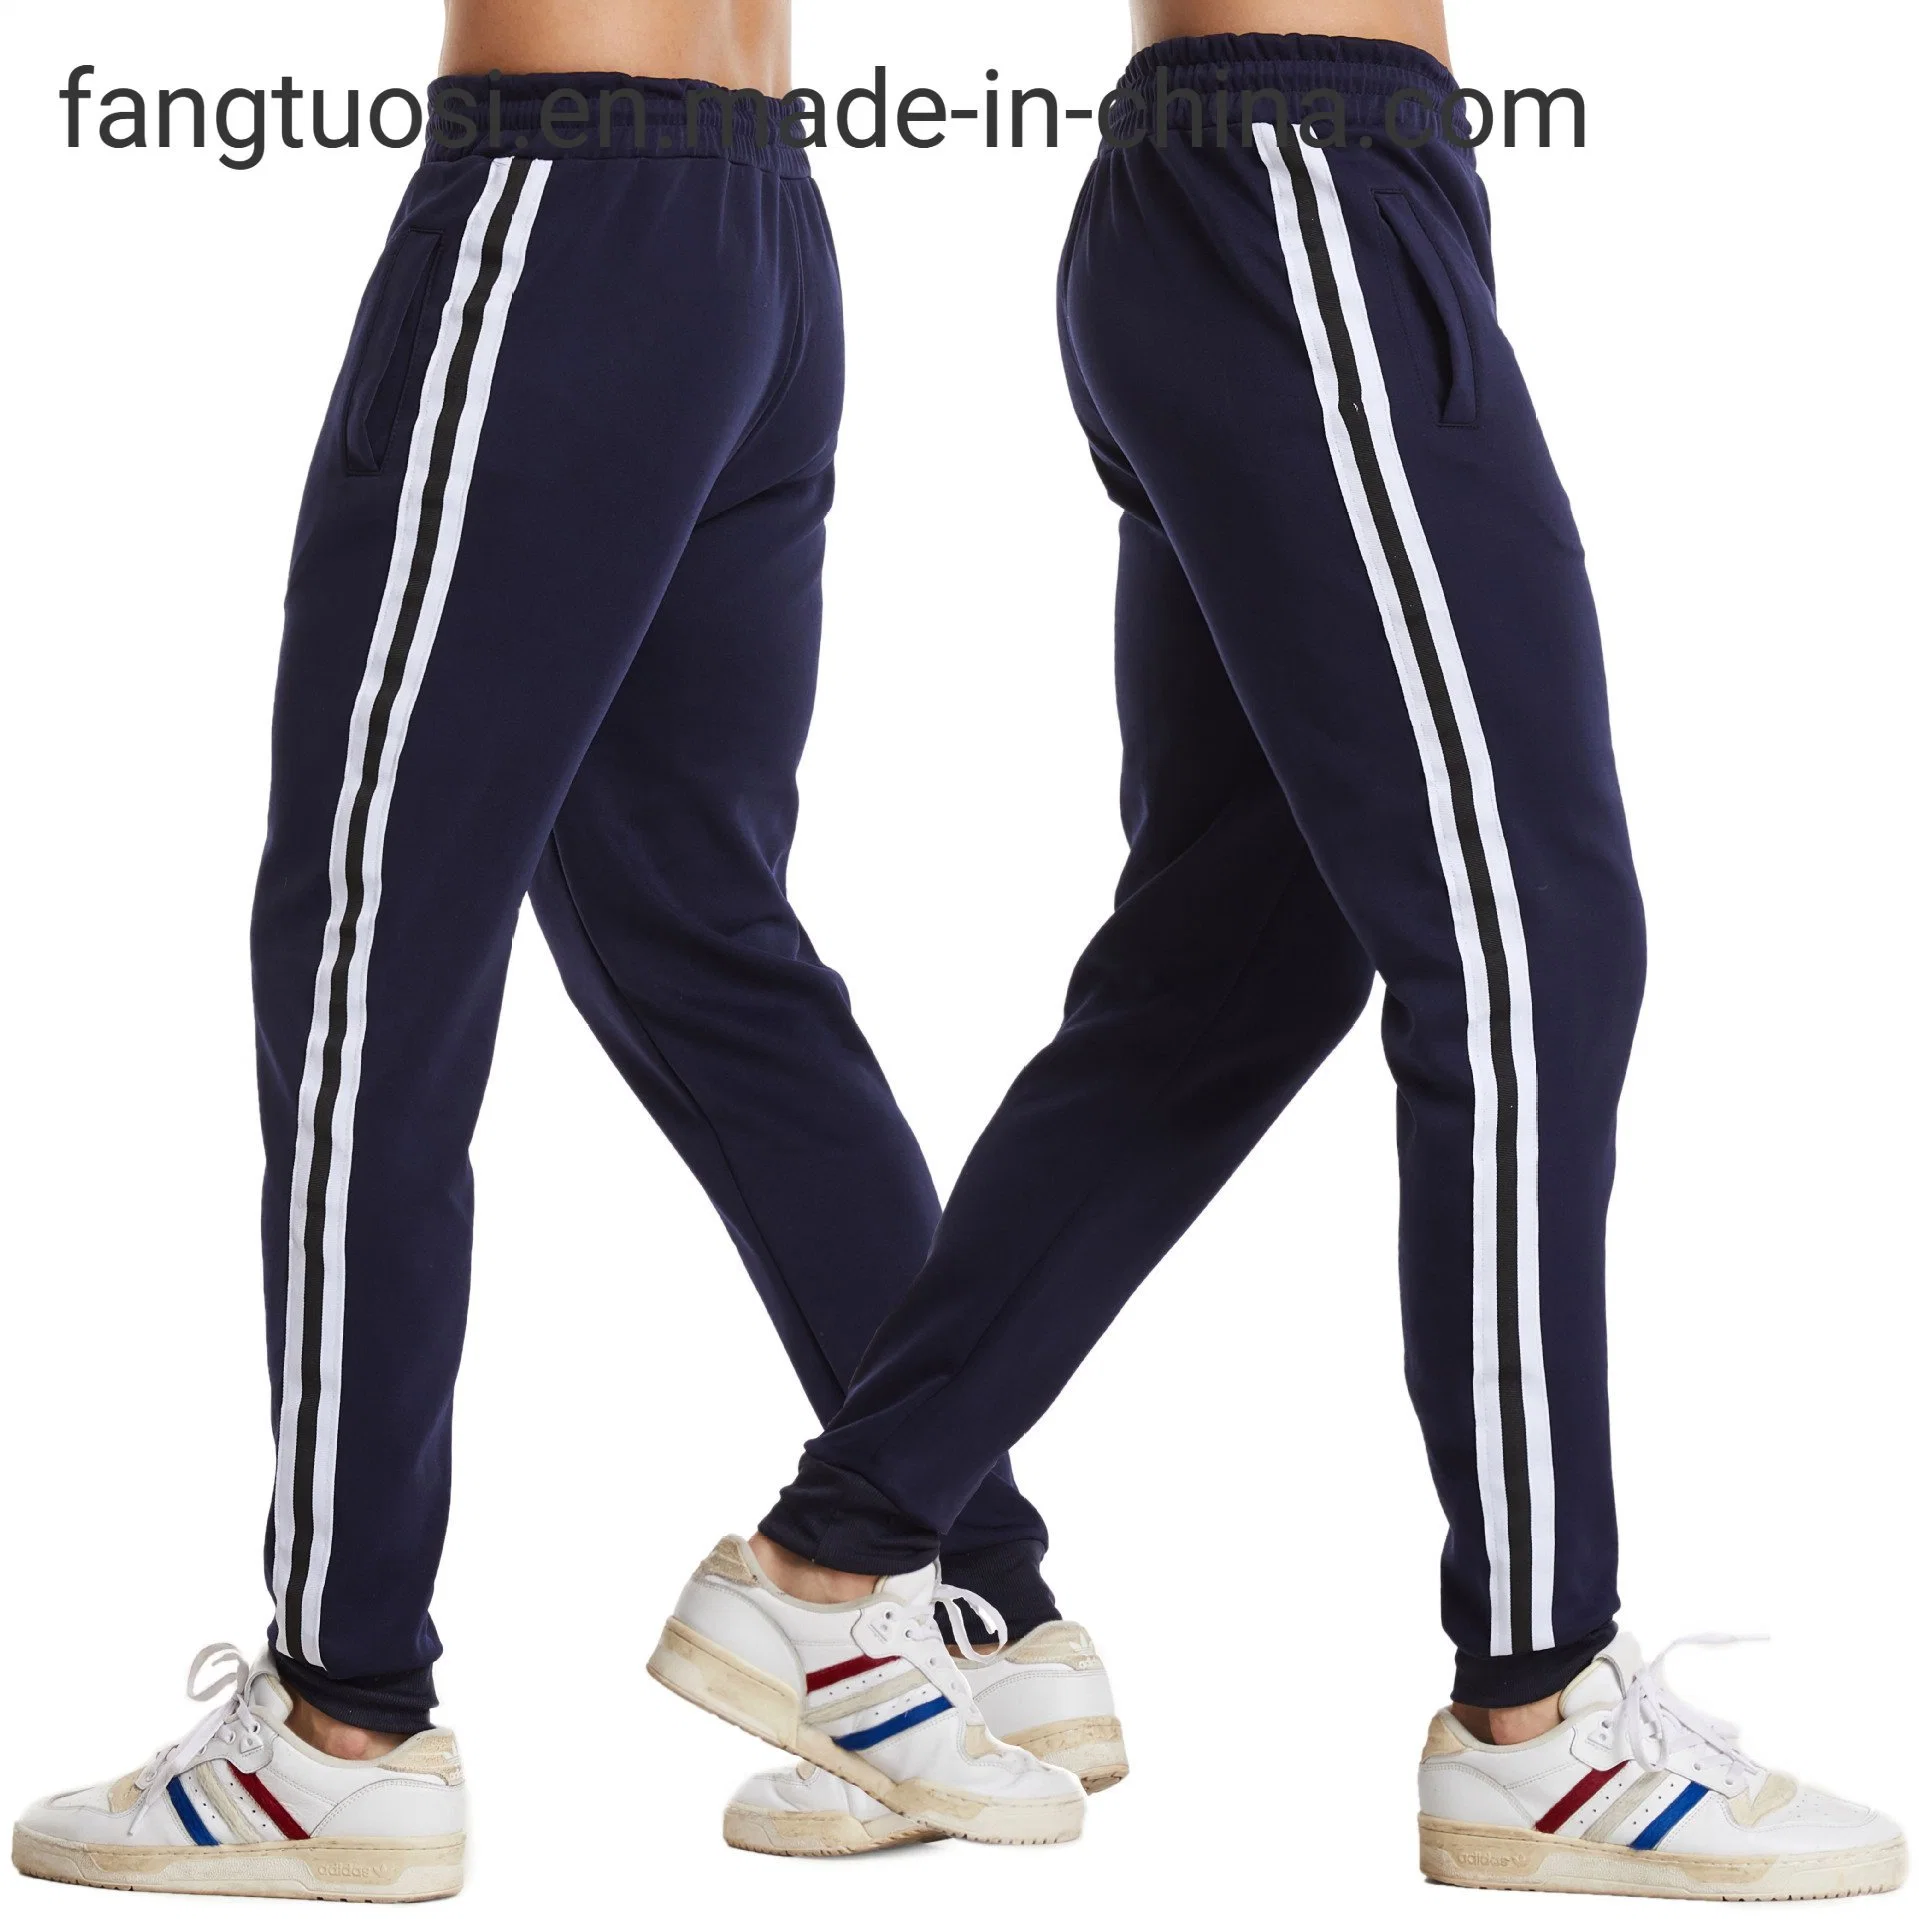 Men's Spring and Autumn Sports Trousers Elastic Closing Pencil Pants Breathable Training Running Fitness Pants